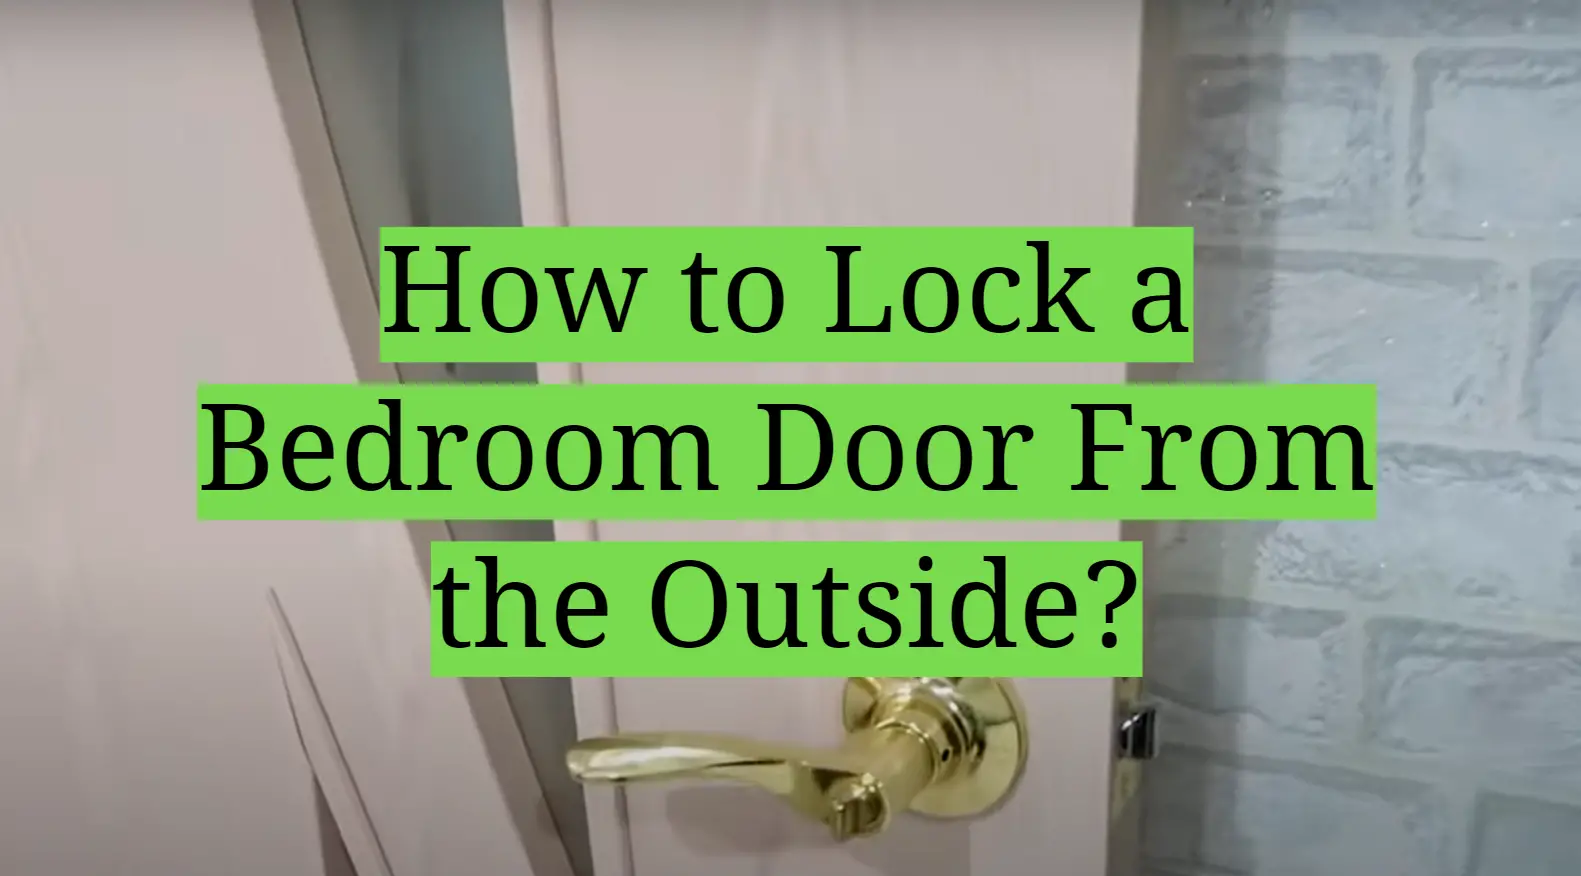 How to Lock a Bedroom Door From the Outside?